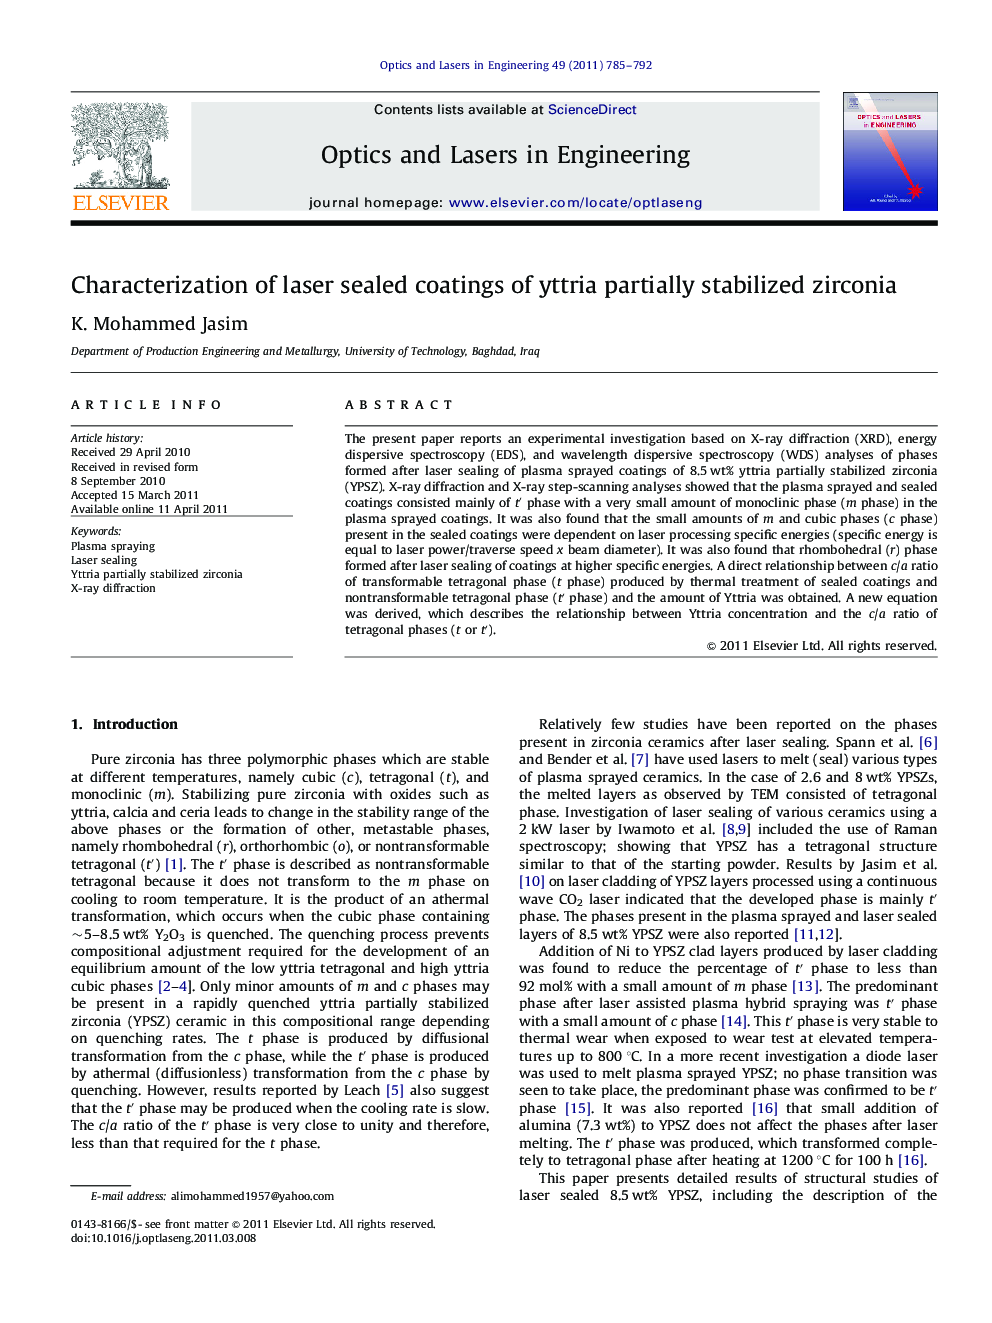 Characterization of laser sealed coatings of yttria partially stabilized zirconia